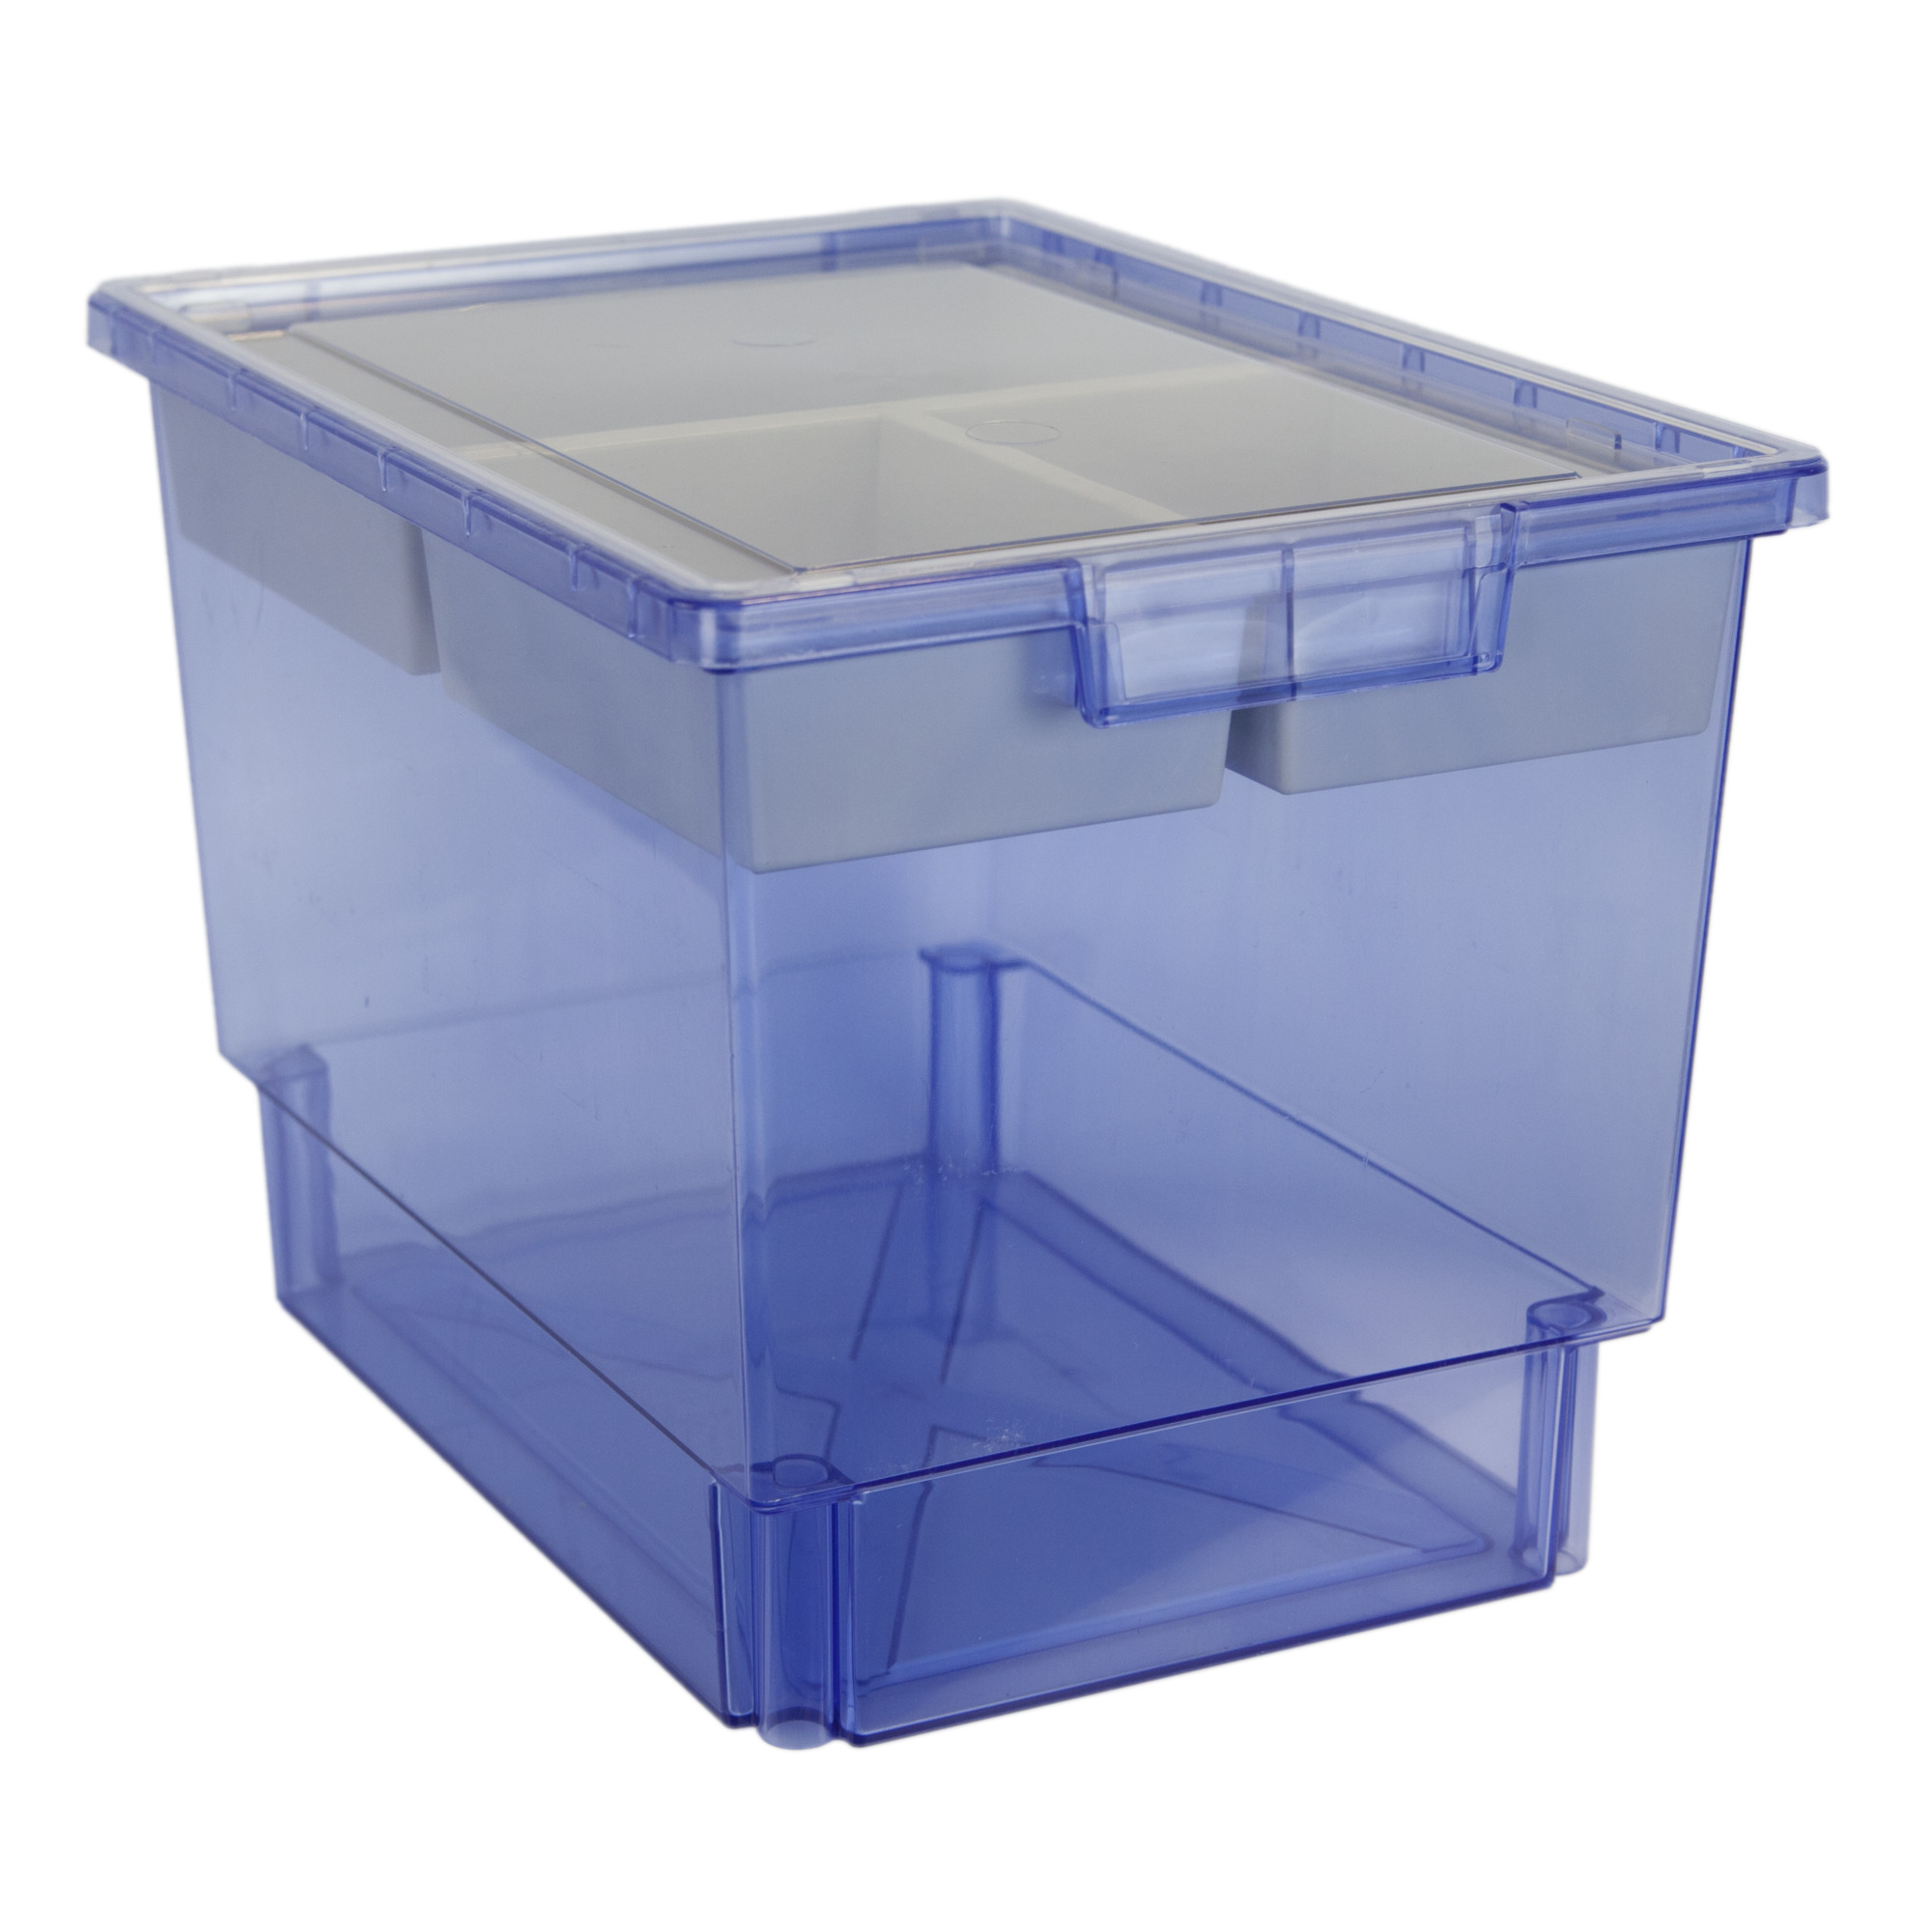 StorWerks, SlimLine 12Inch Tray Kit ( 3 x Inserts) Blue Tint, Included (qty.) 1, Material Plastic, Height 12 in, Model - Certwood CE1954TB-NK0004-1